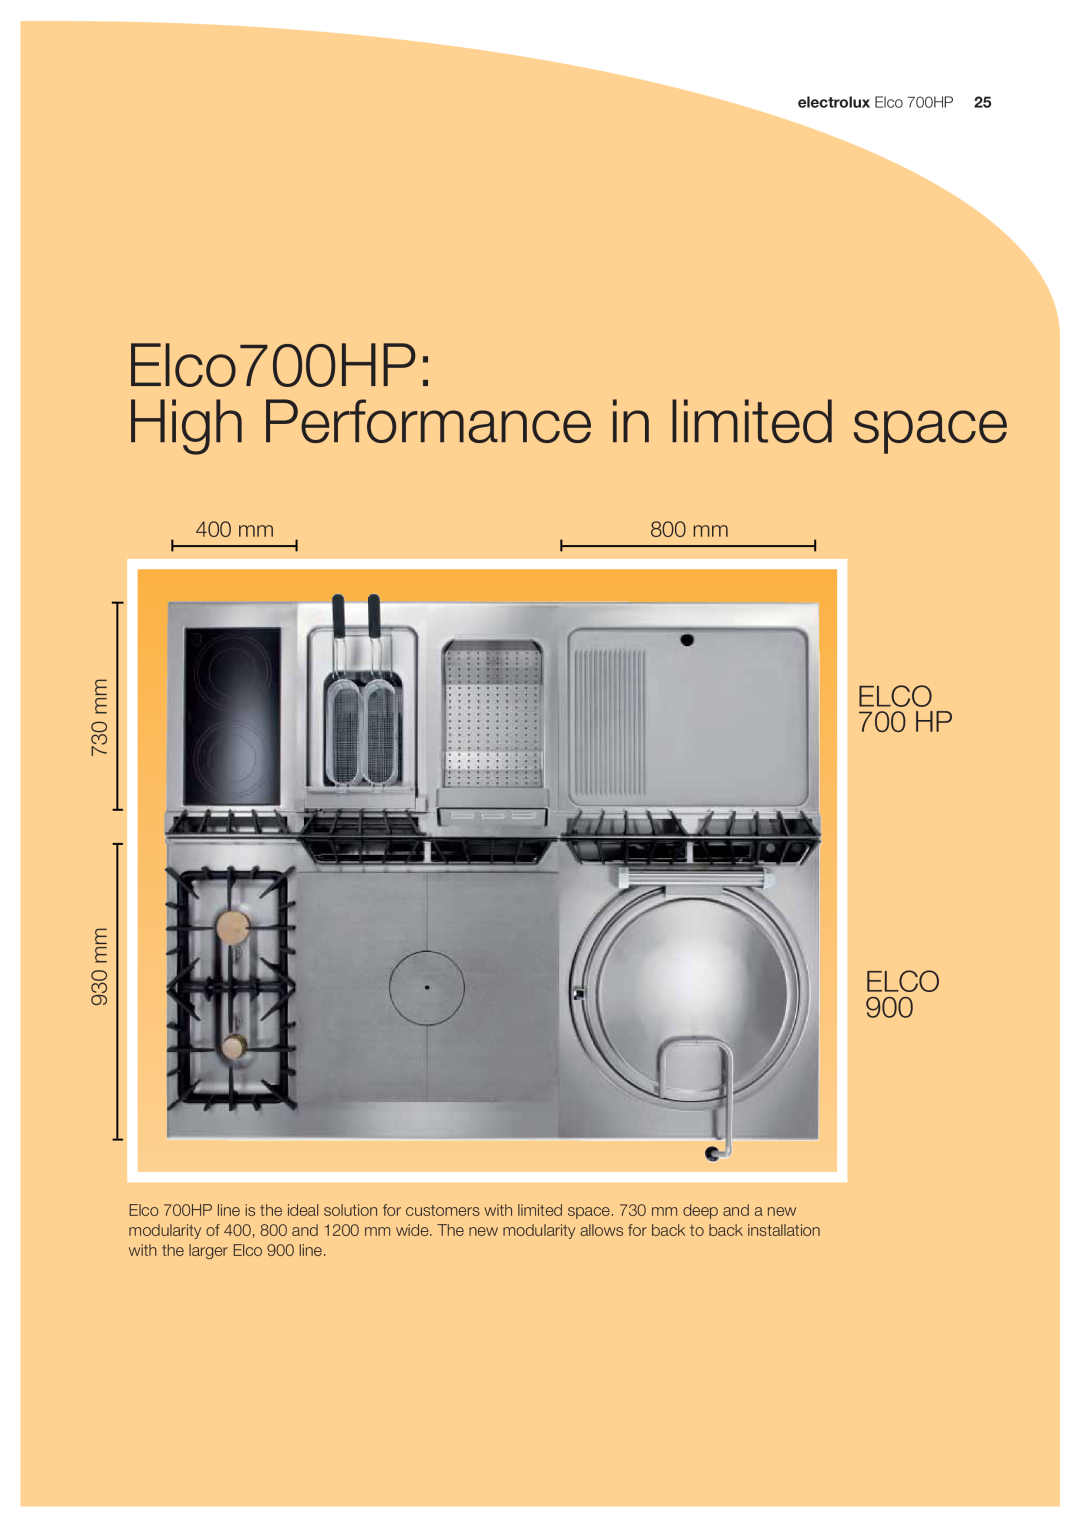 Electrolux manual Elco700HP High Performance in limited space, ELCO 700 HP ELCO, 400 mm, 800 mm, 730 mm 930 mm 